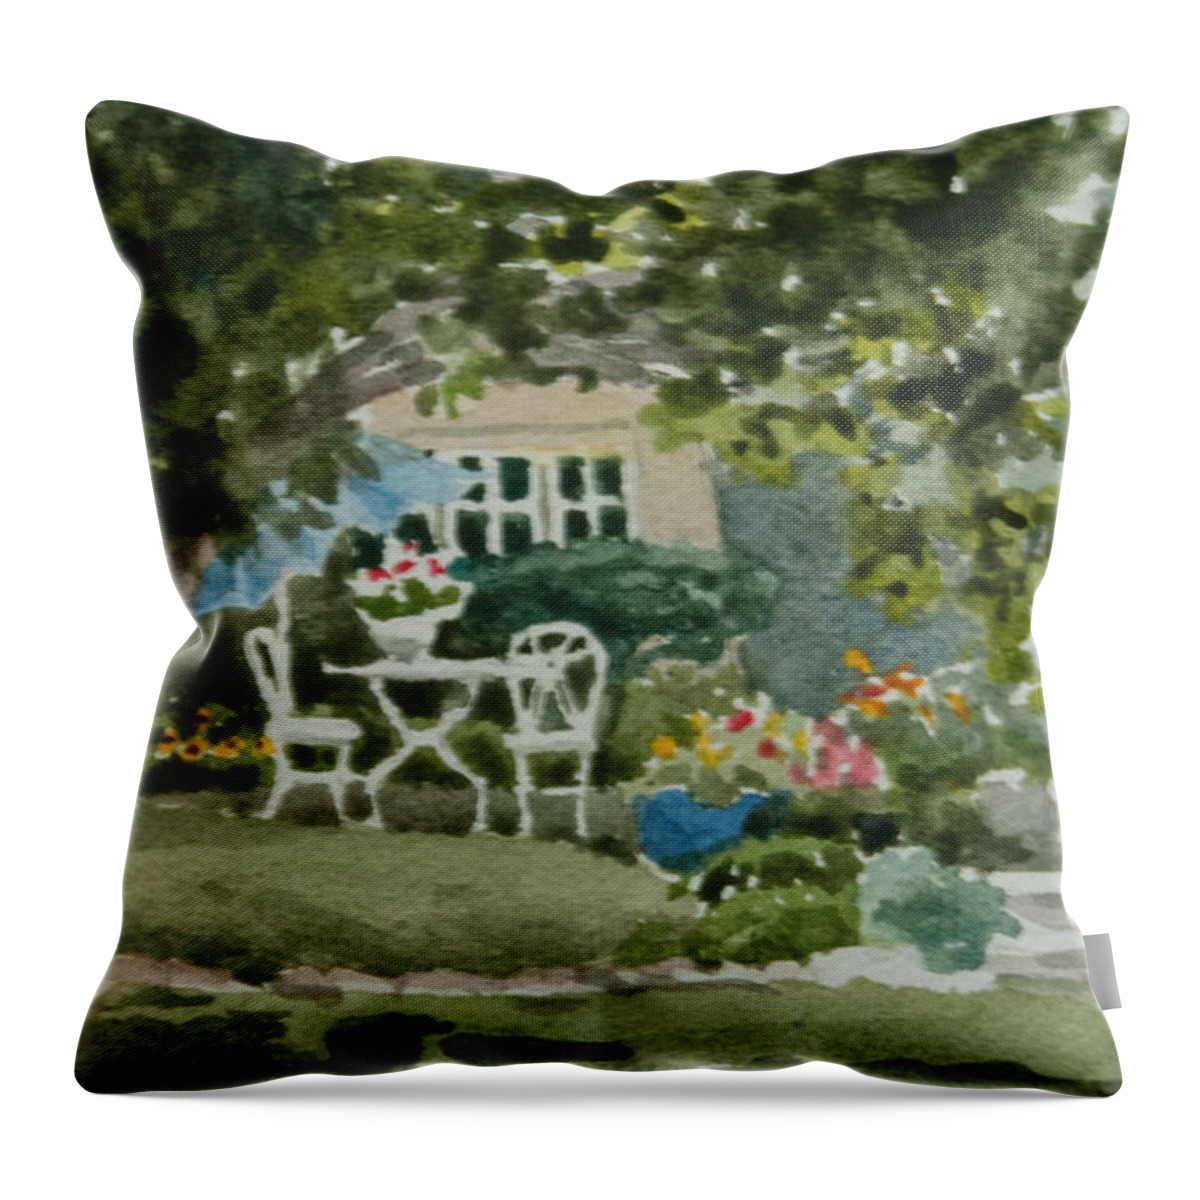 Landscape Throw Pillow featuring the painting Lura's House by Heidi E Nelson